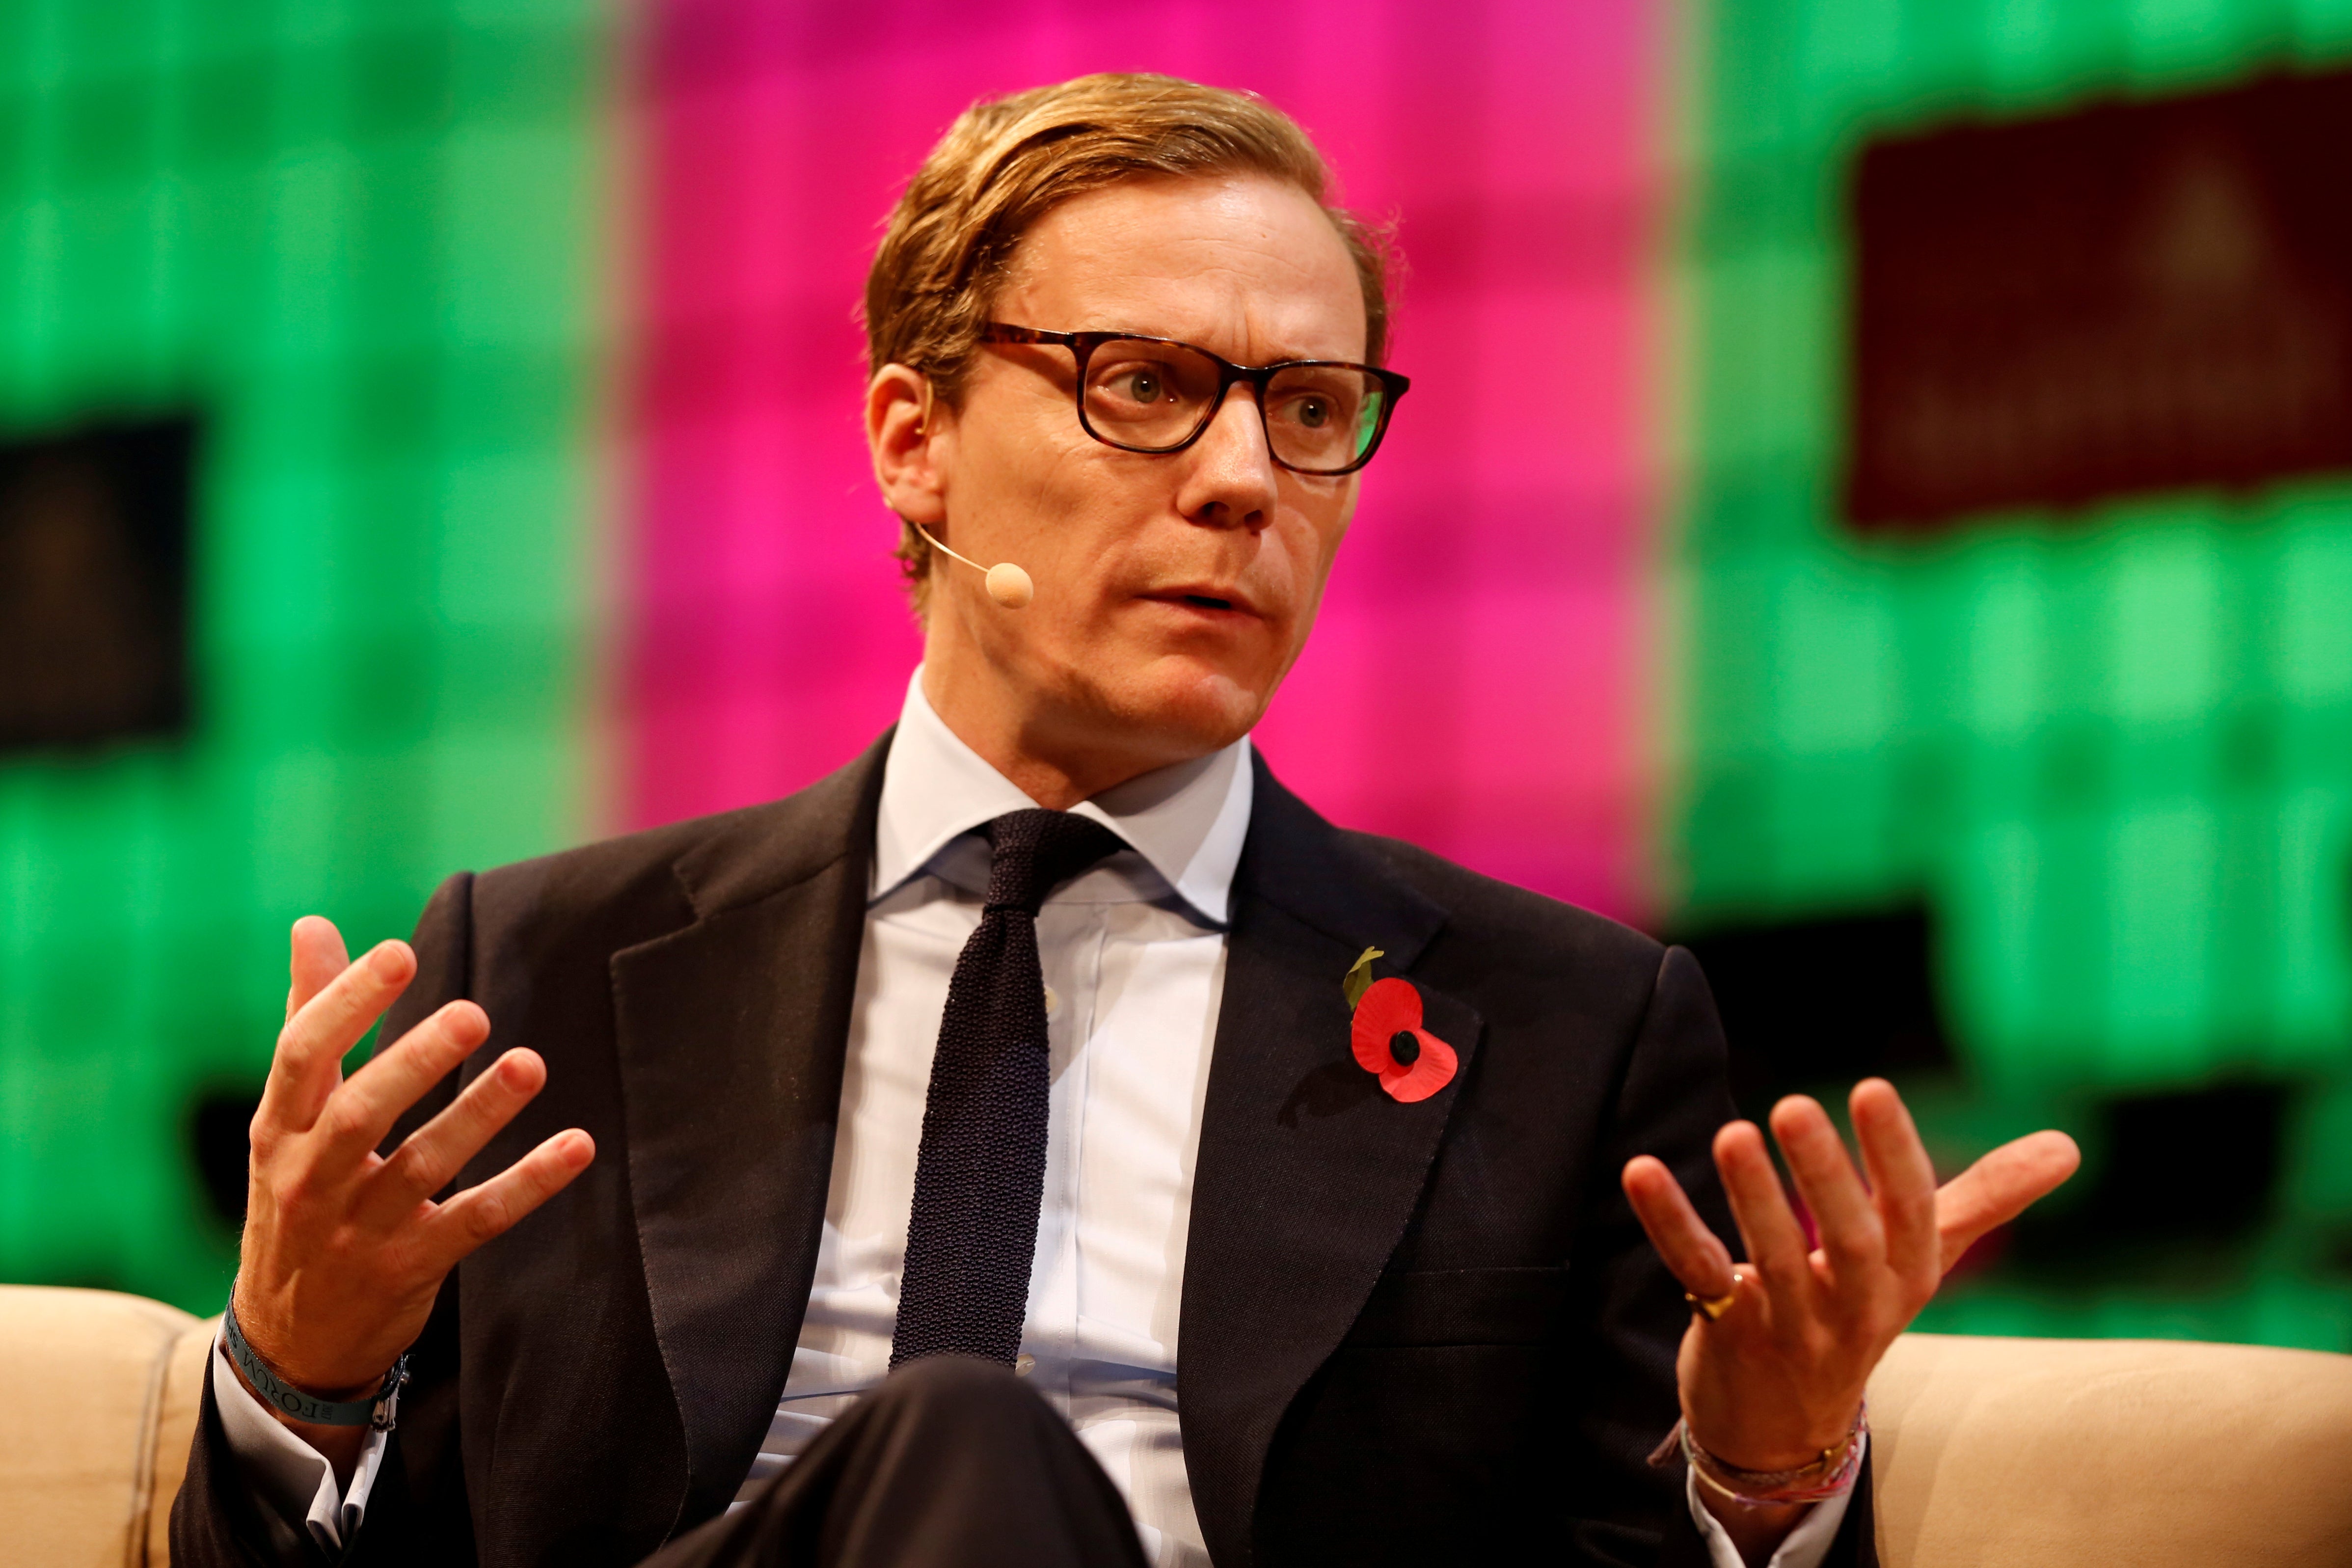 Alexander Nix speaks during the Web Summit, Europe's biggest tech conference, in Lisbon, Portugal, in November 2017